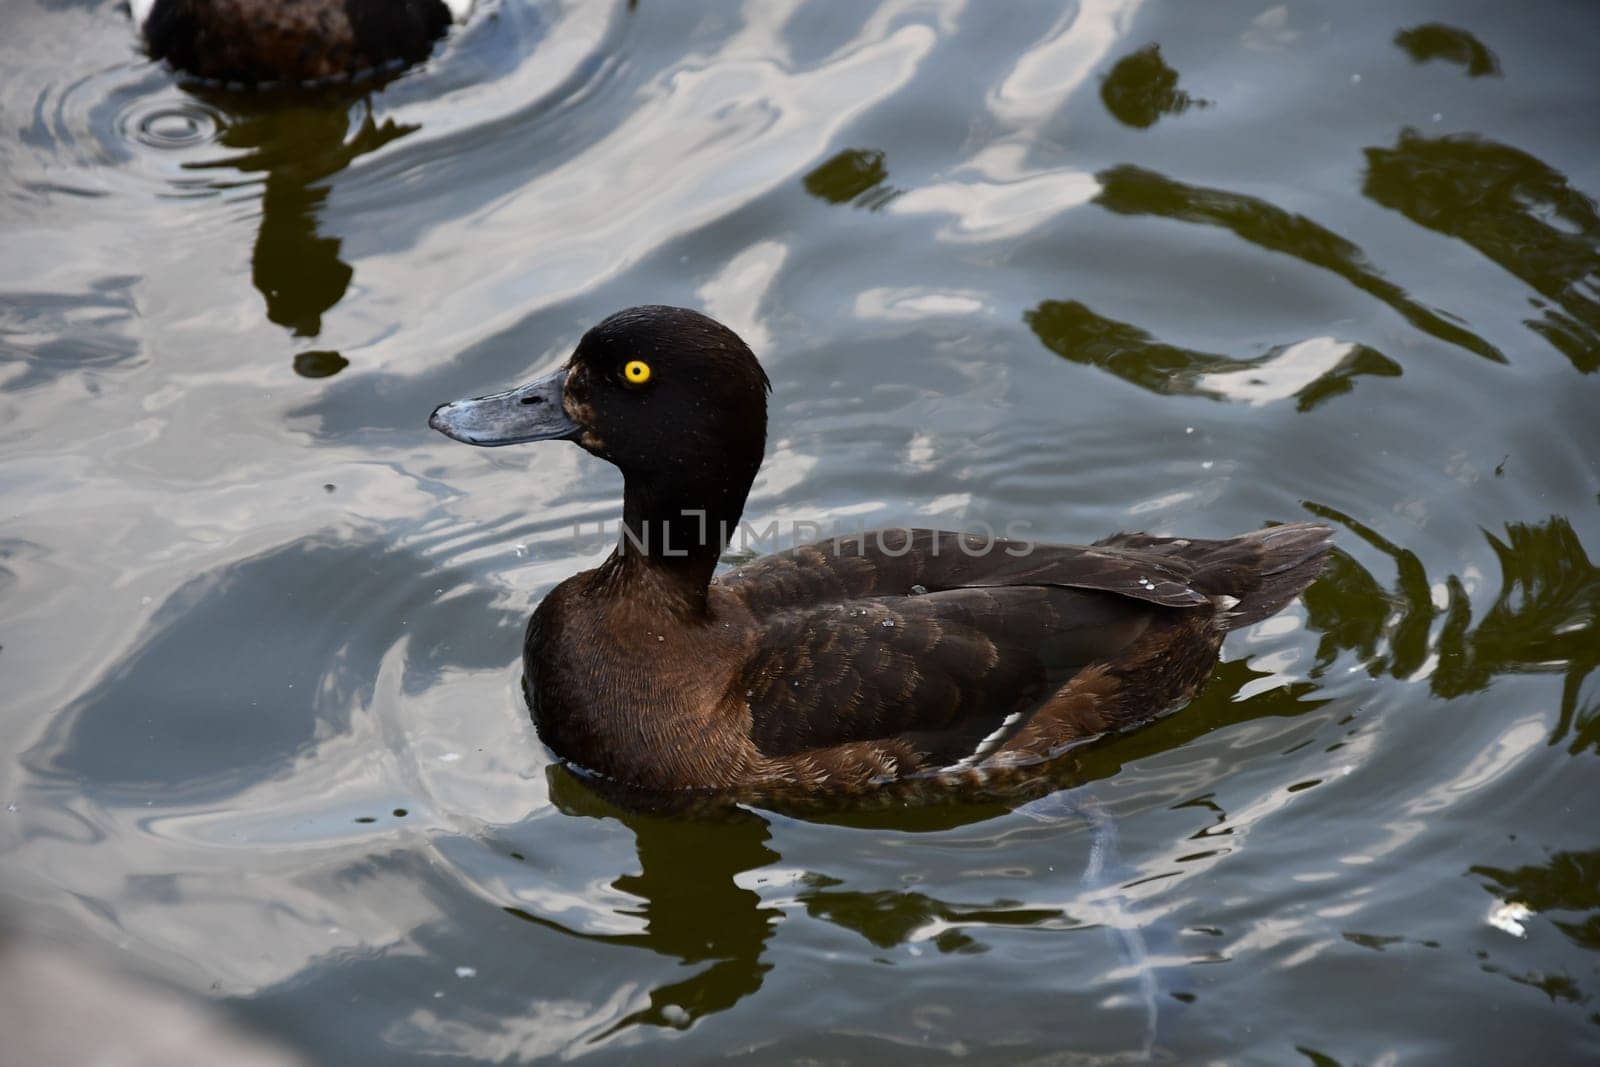 Closeup of a lovely black duck with yellow eyes floating on the water surface